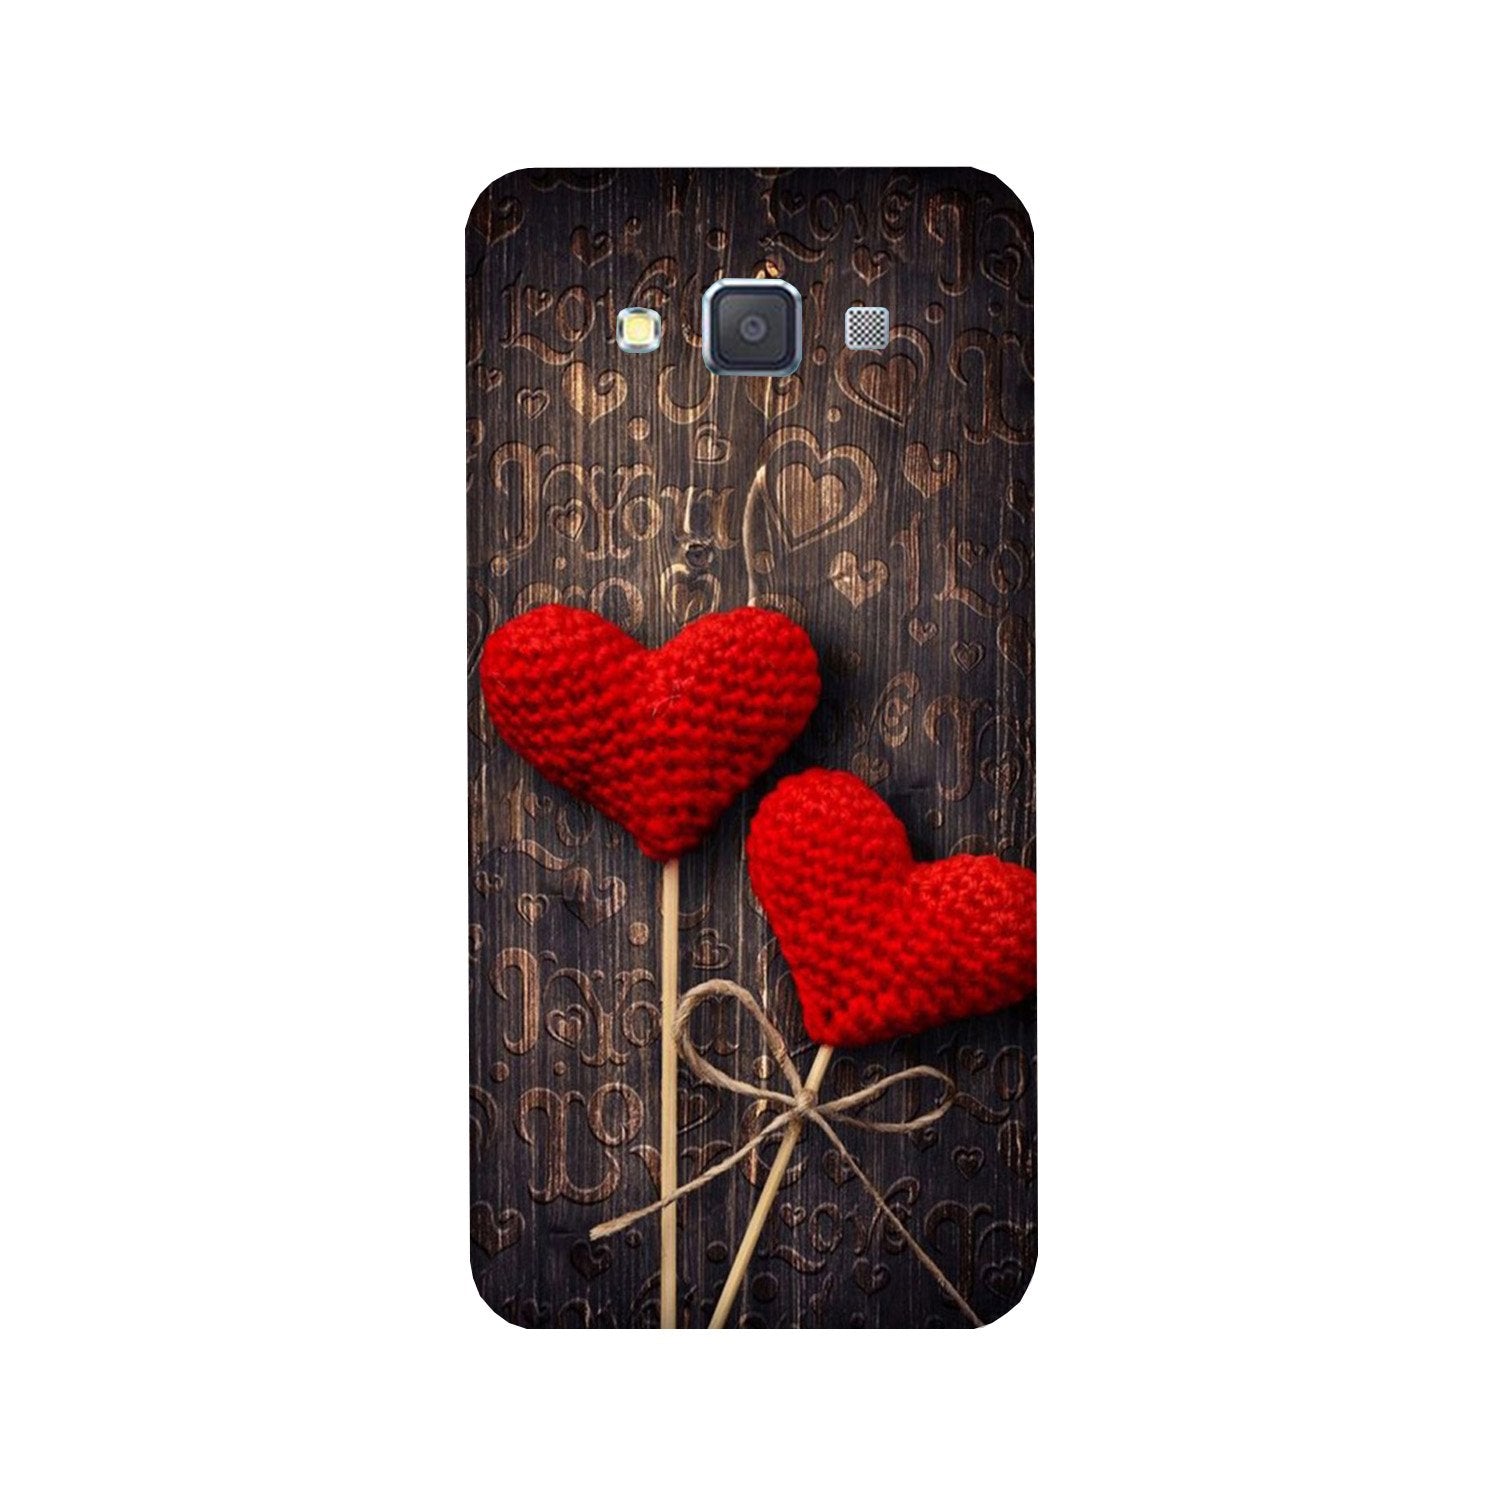 Red Hearts Case for Galaxy ON7/ON7 Pro